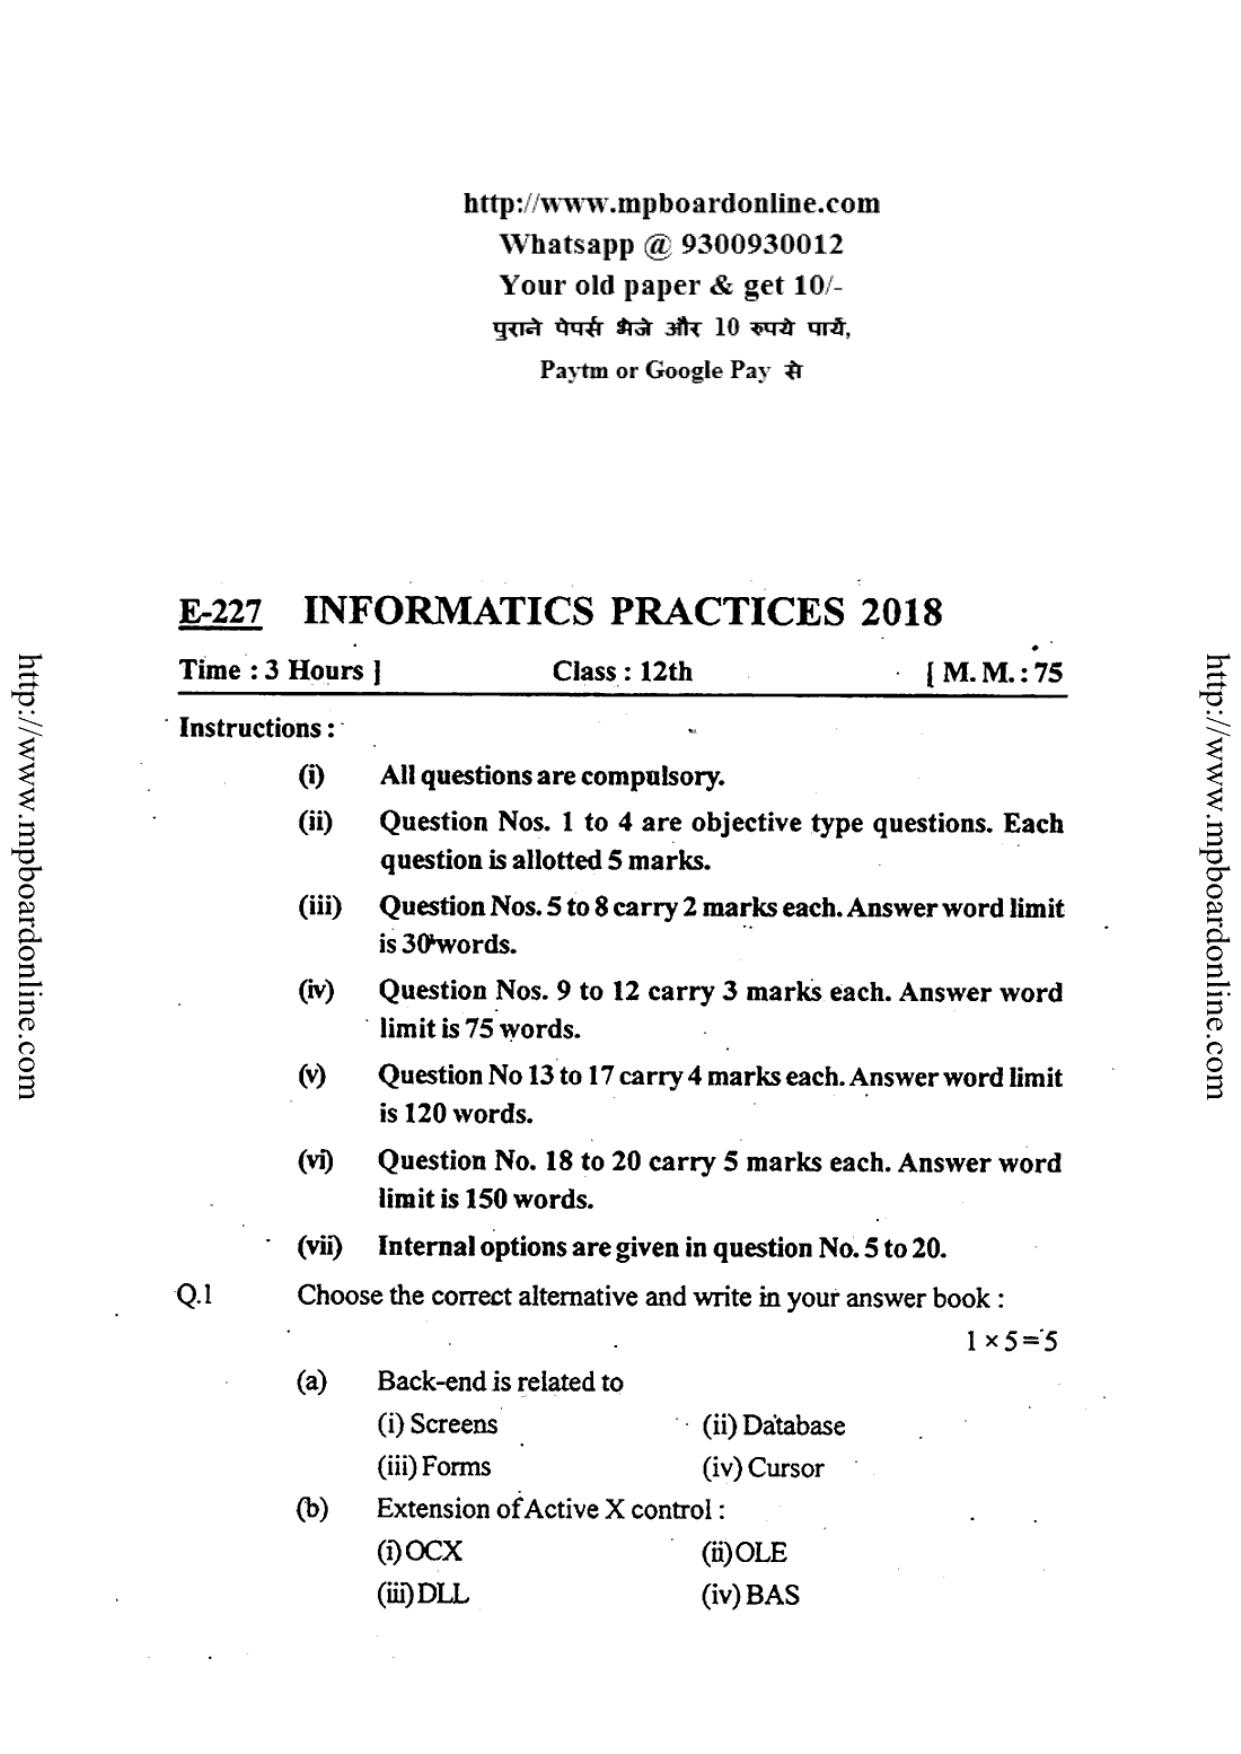 MP Board Class 12 Informatics Practices 2018 Question Paper - Page 4